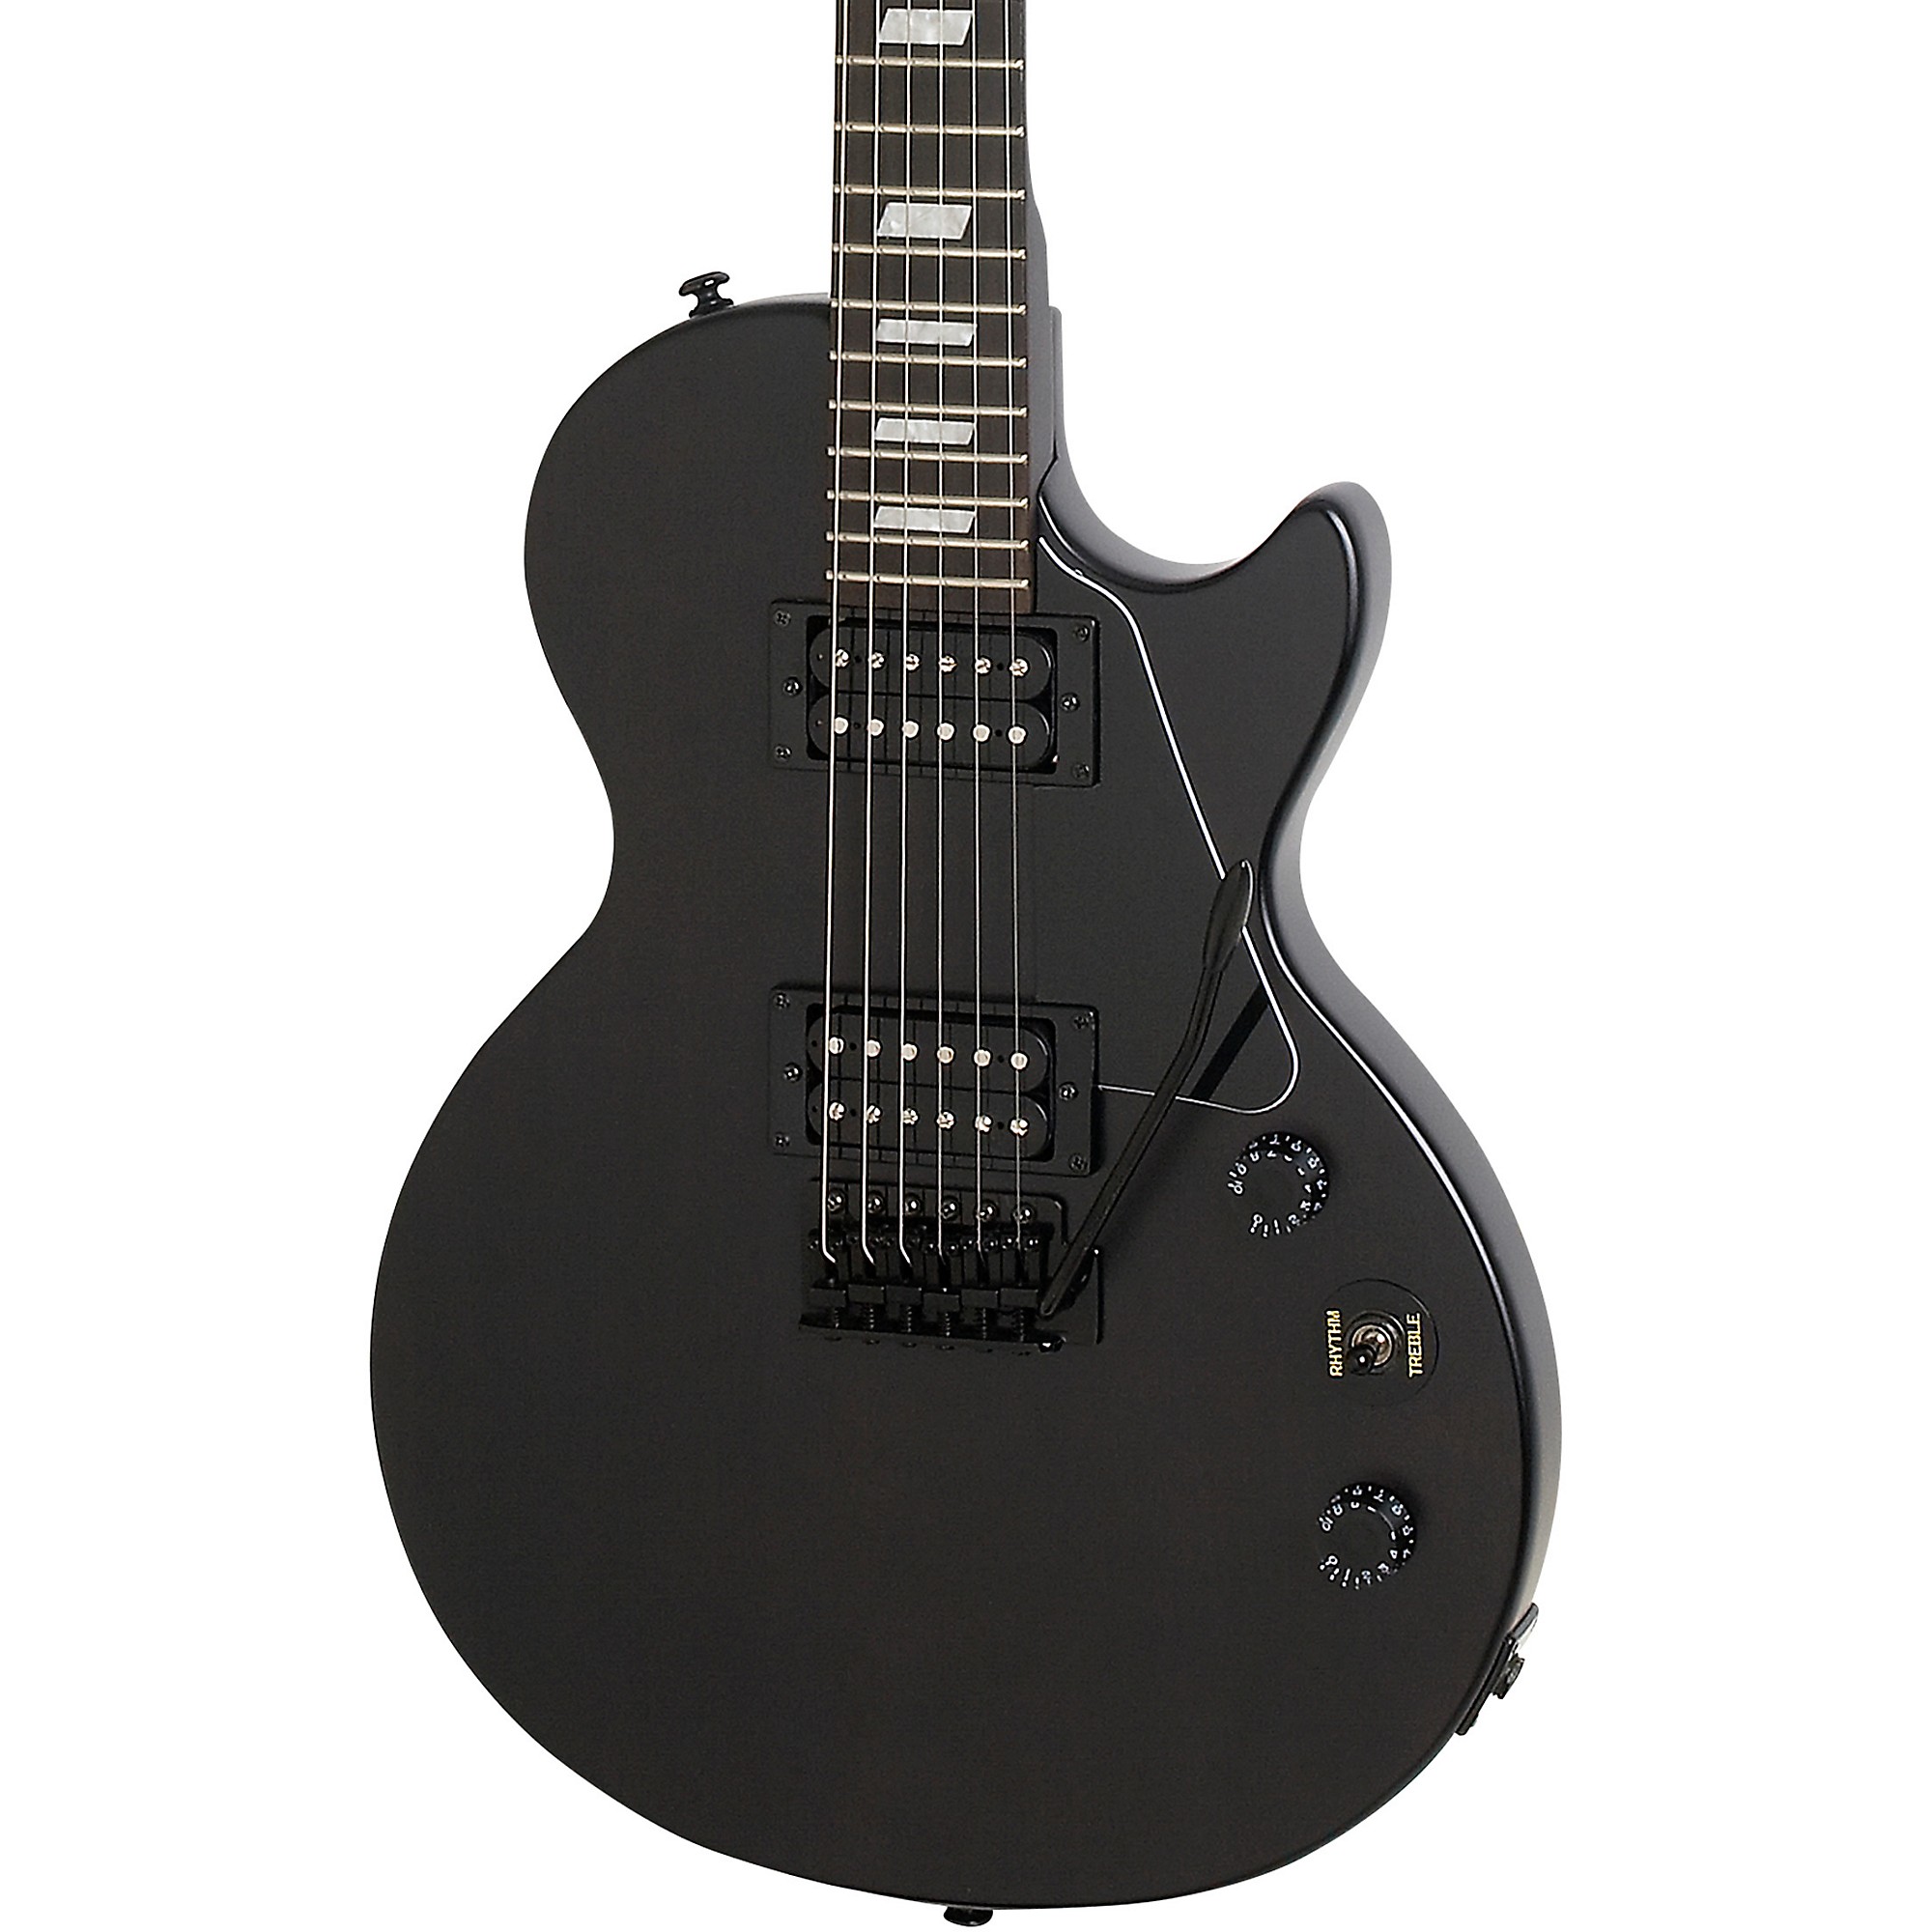 Mount Bank Stedord Dare Epiphone Special-II GT Electric Guitar Worn Black | Guitar Center